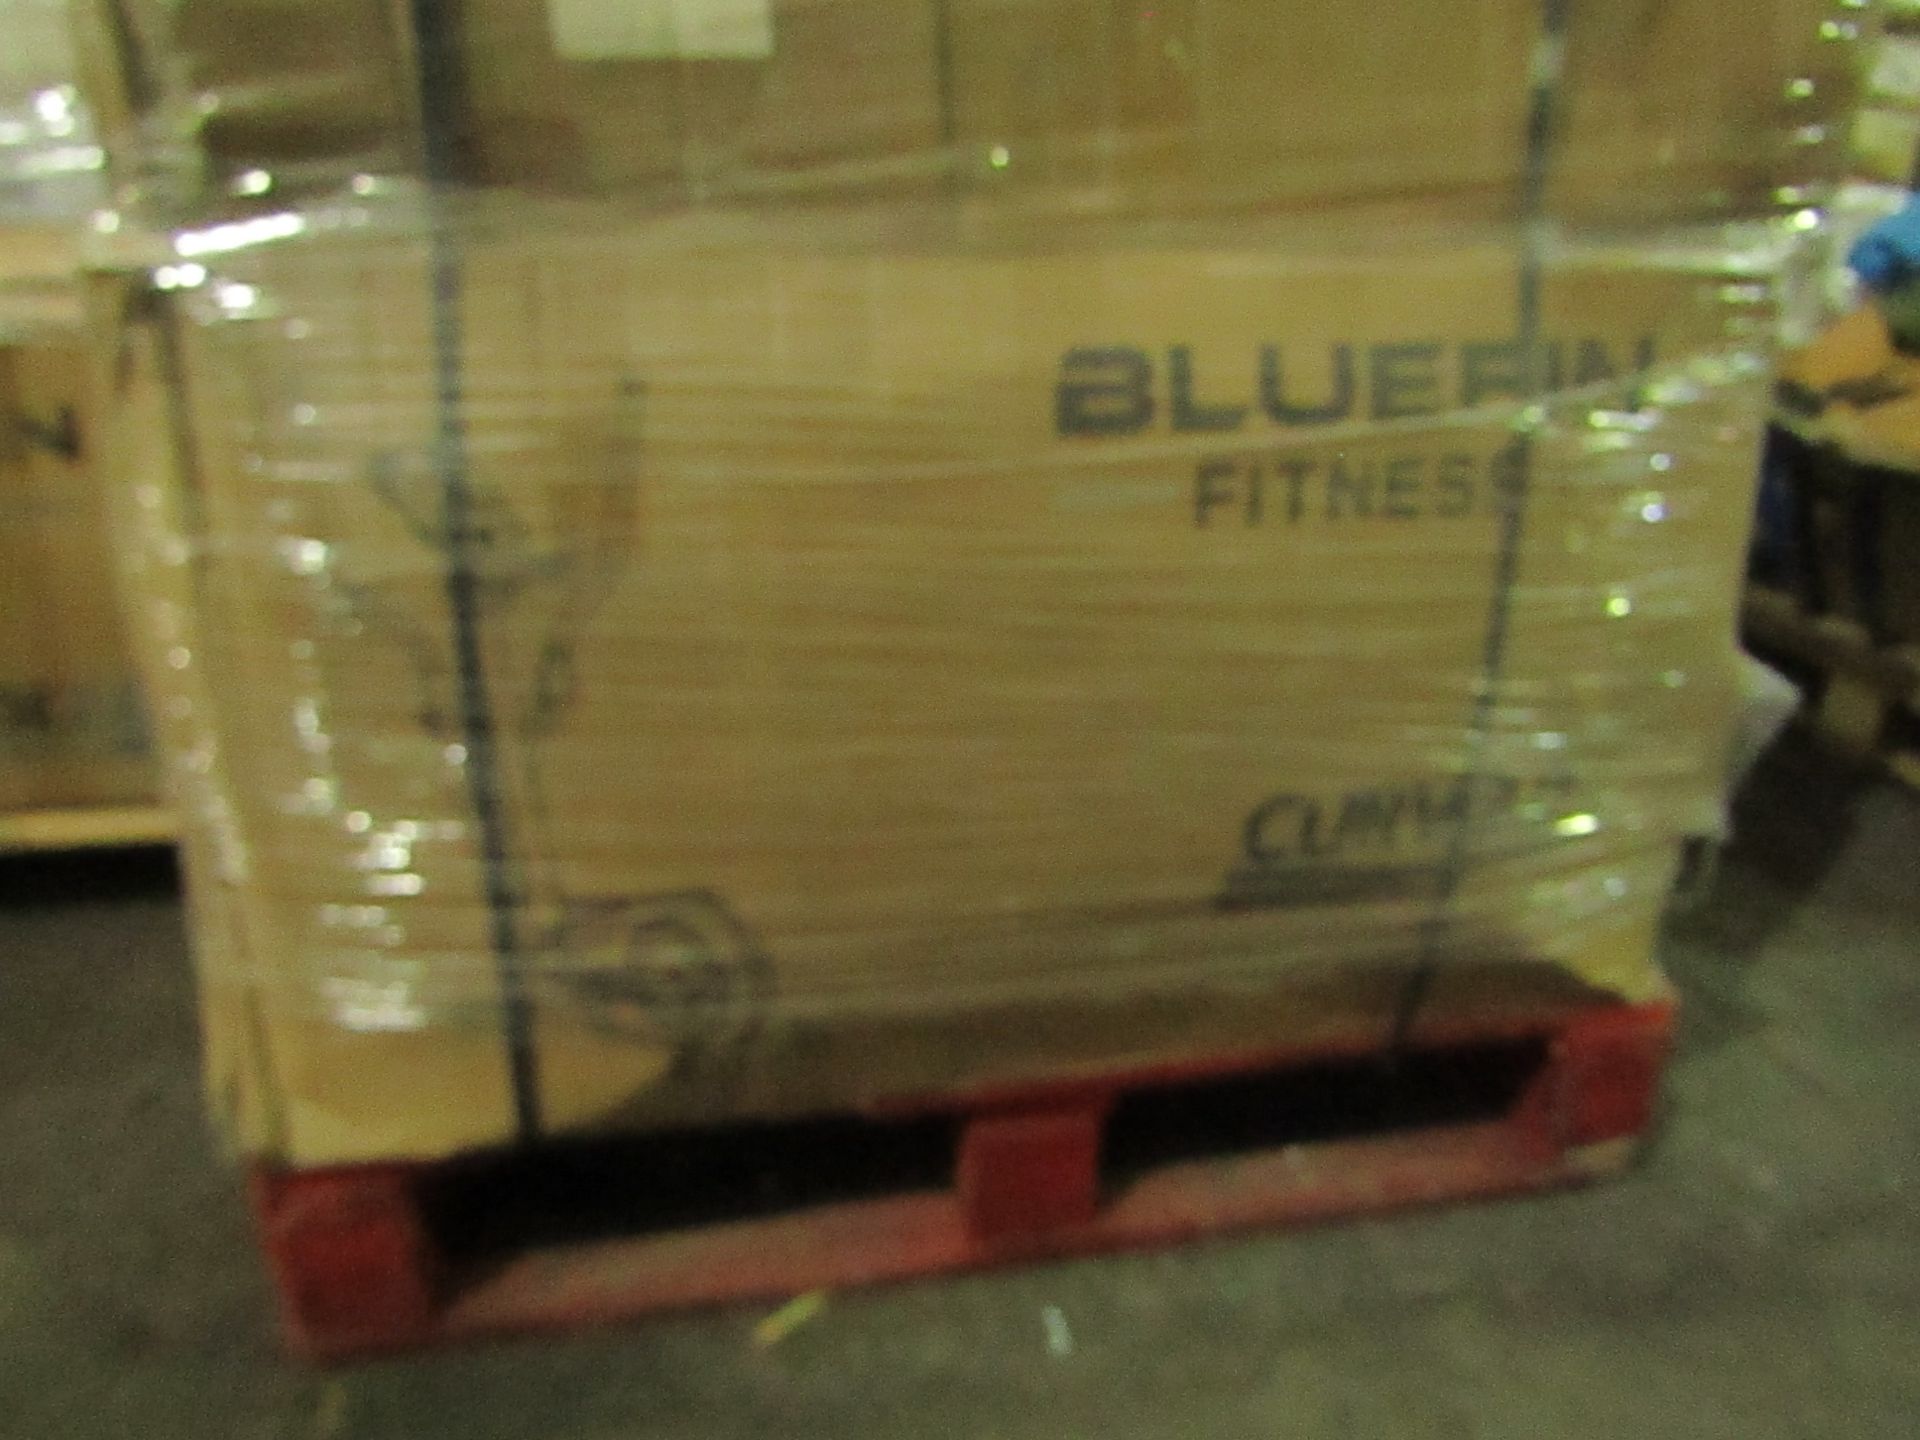 Bluefin Fitness Curv 2.0 Elliptical Air-Walker Cross Trainer and Step Machine RRP ?599.00 Our 2.0 - Image 2 of 2